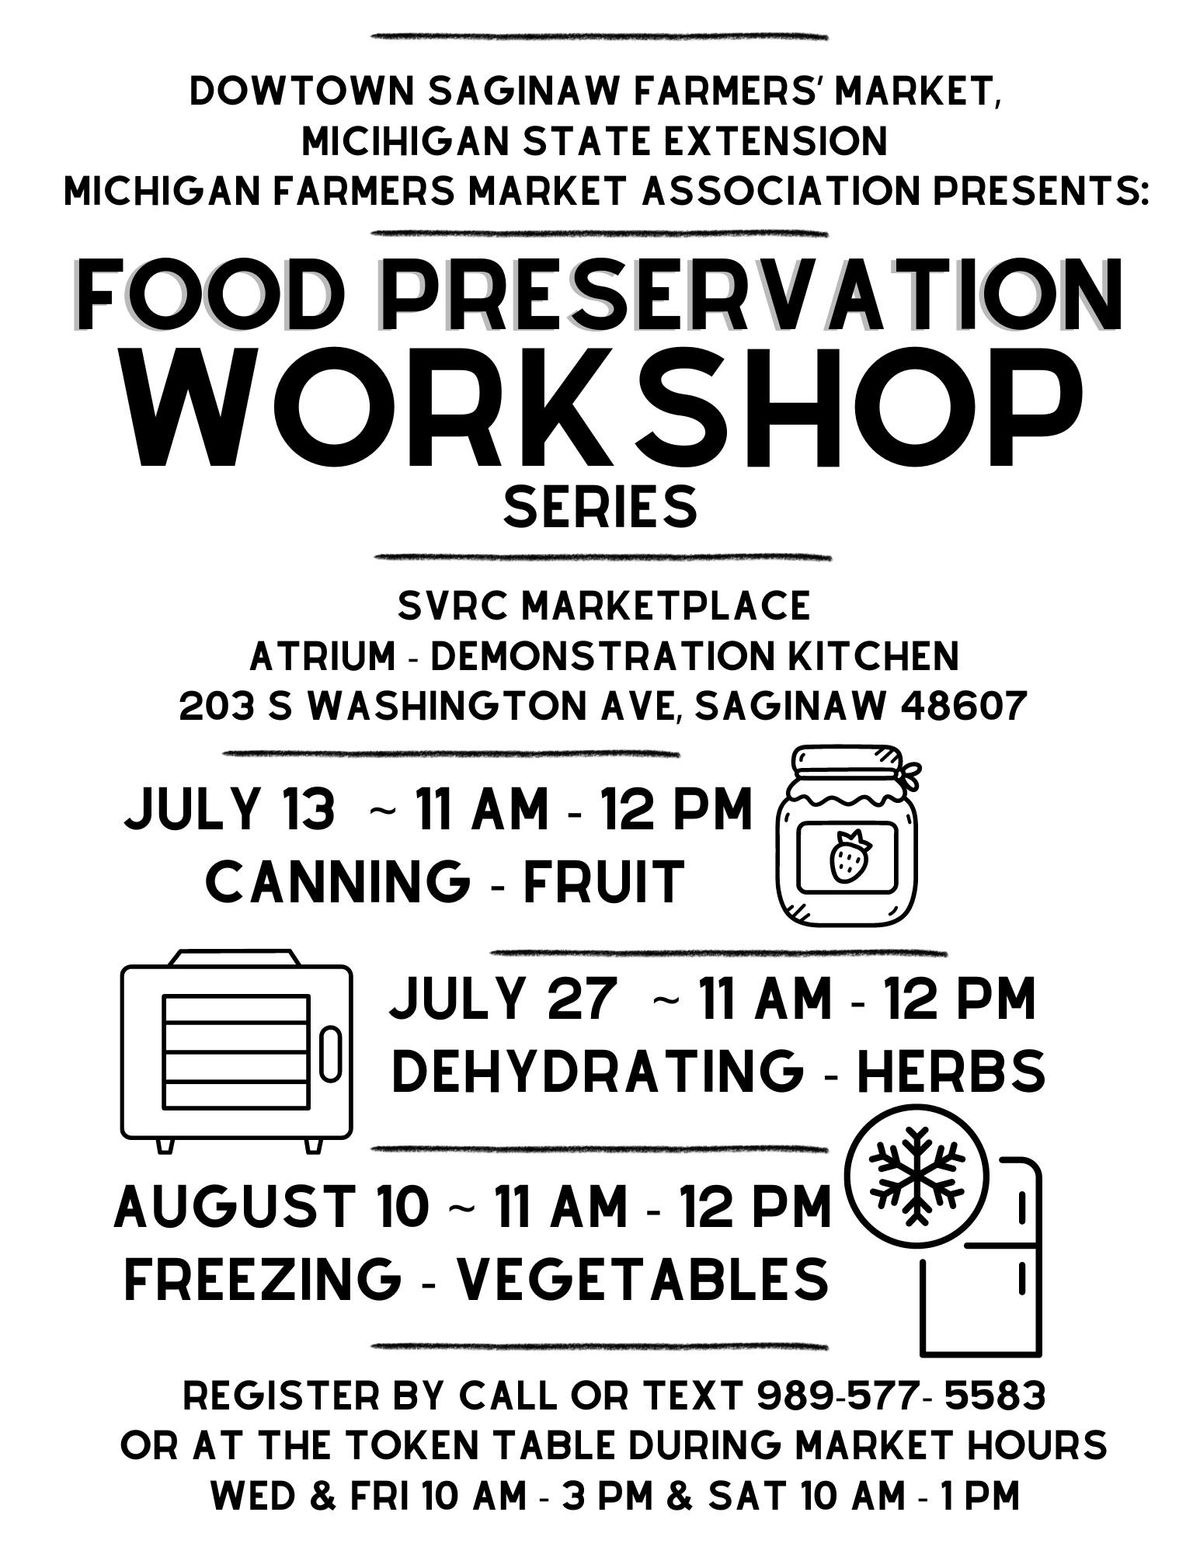 Food Safety While Preserving Demonstration Classes